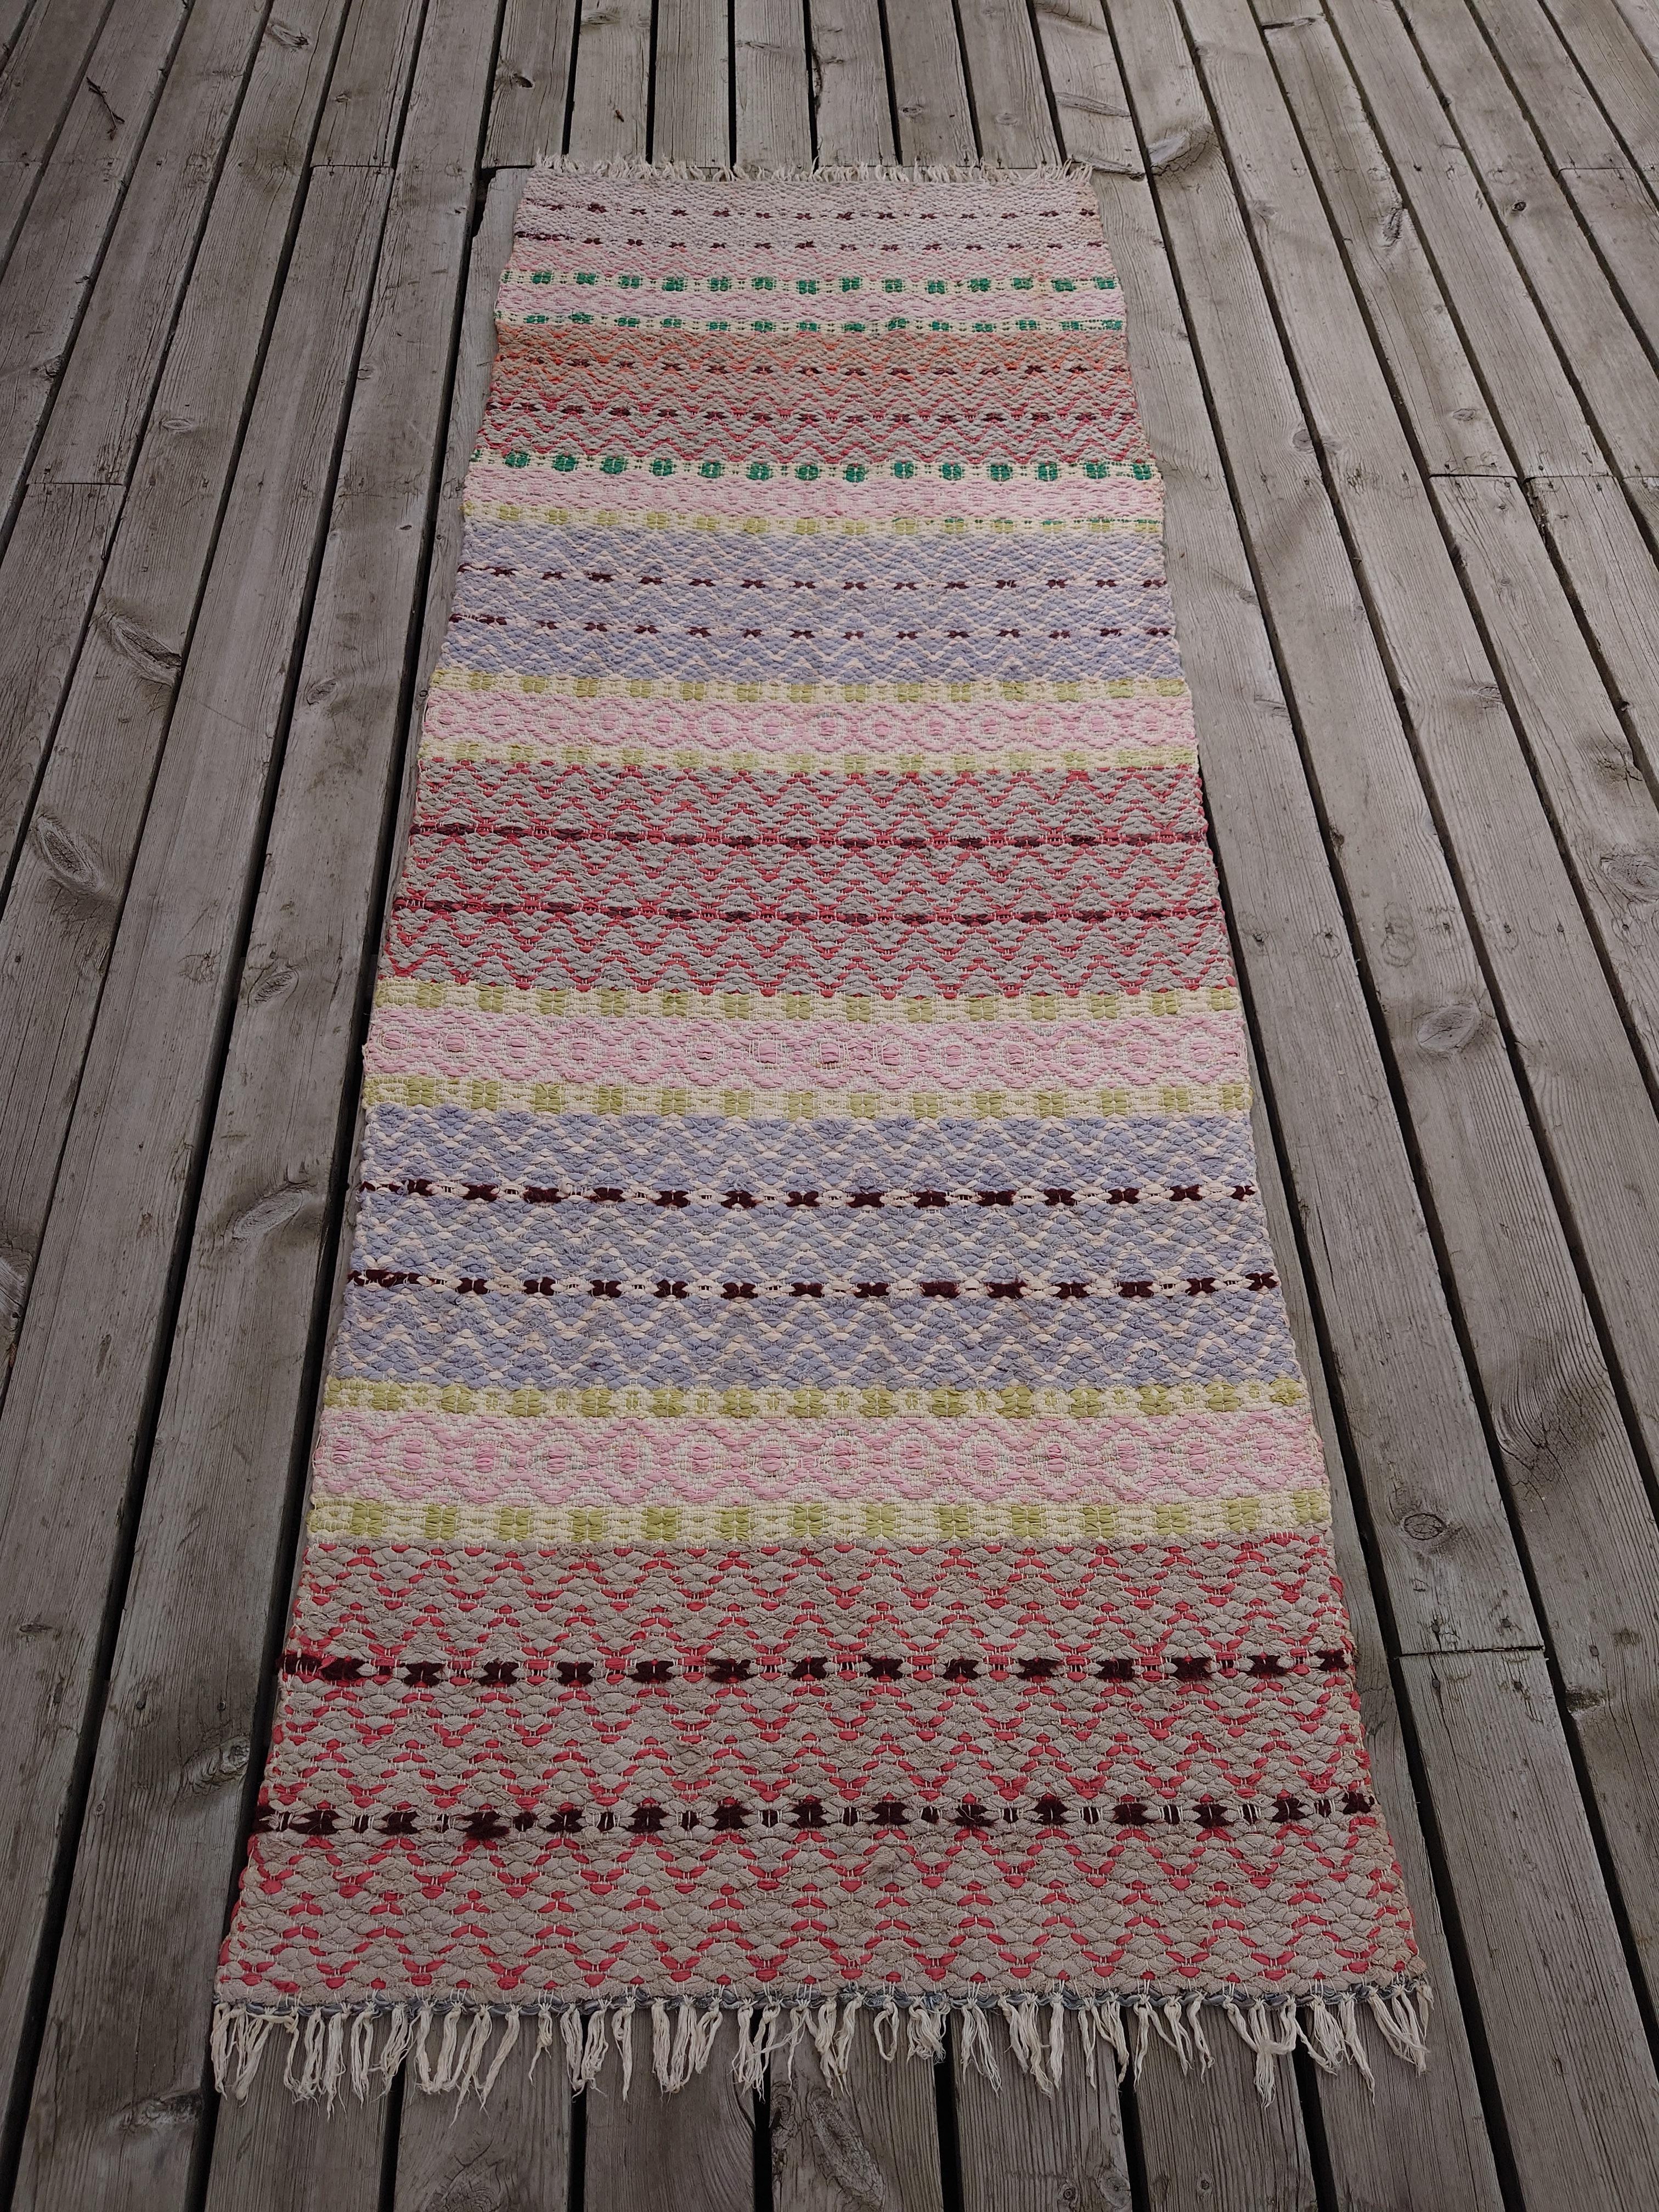 A fantastically Swedish Rag Rug in beautiful color & pattern.
Handwowen in Boden Northern Sweden .

Vintage & antique Swedish Rag Rugs from Sweden comes in a variety of color shemes and patterns. They are wowen traditional floor looms and each